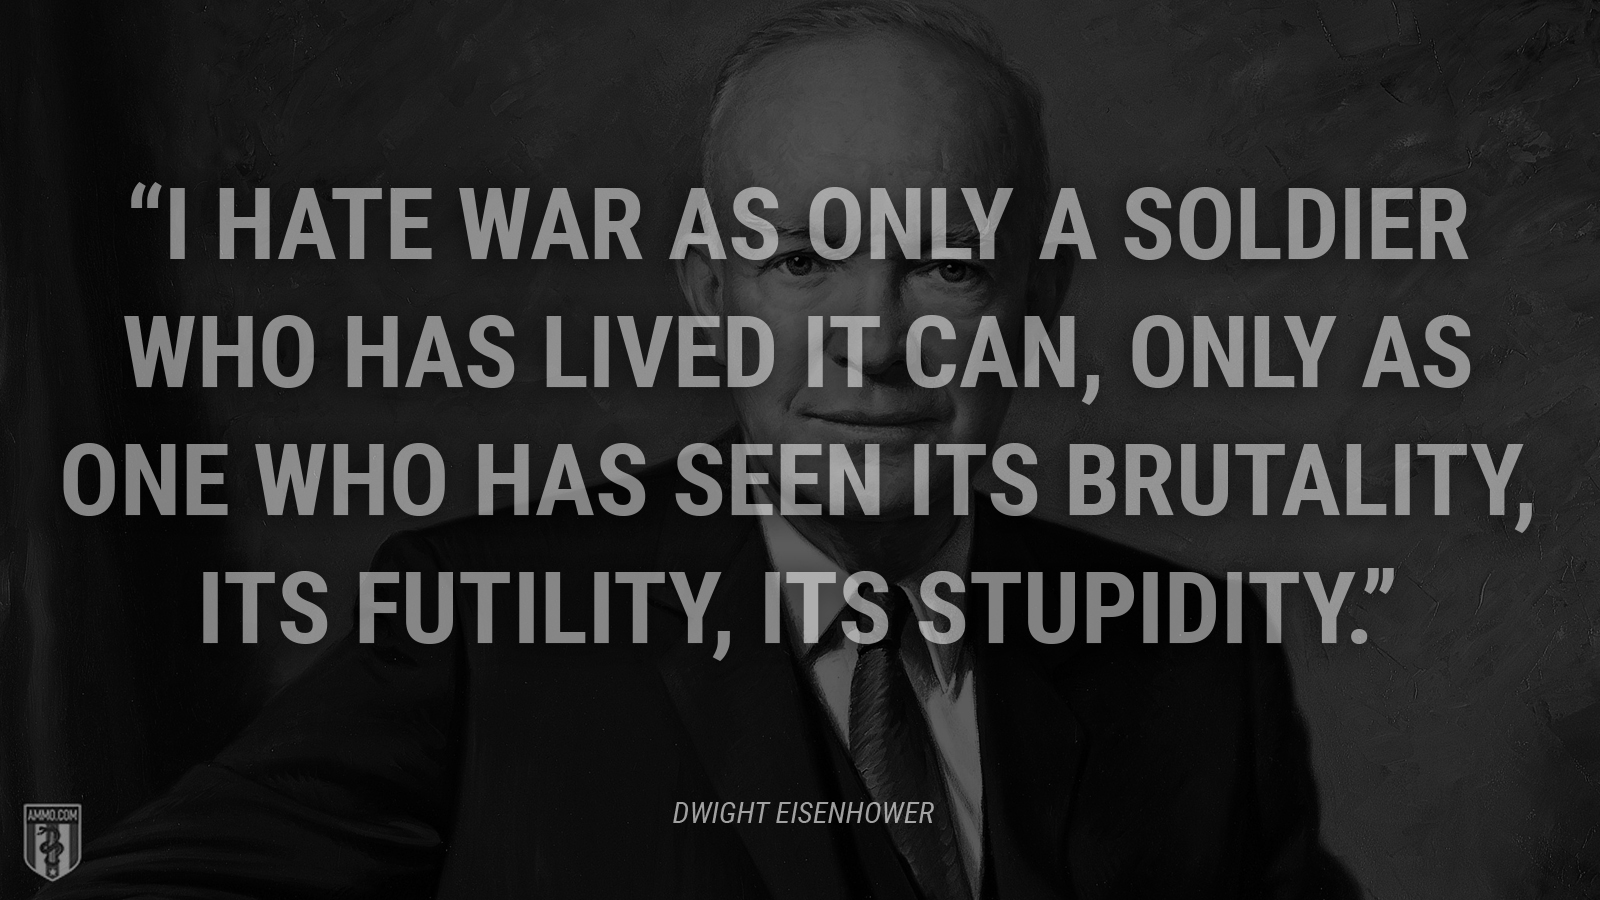 “I hate war as only a soldier who has lived it can, only as one who has seen its brutality, its futility, its stupidity.” - Dwight Eisenhower